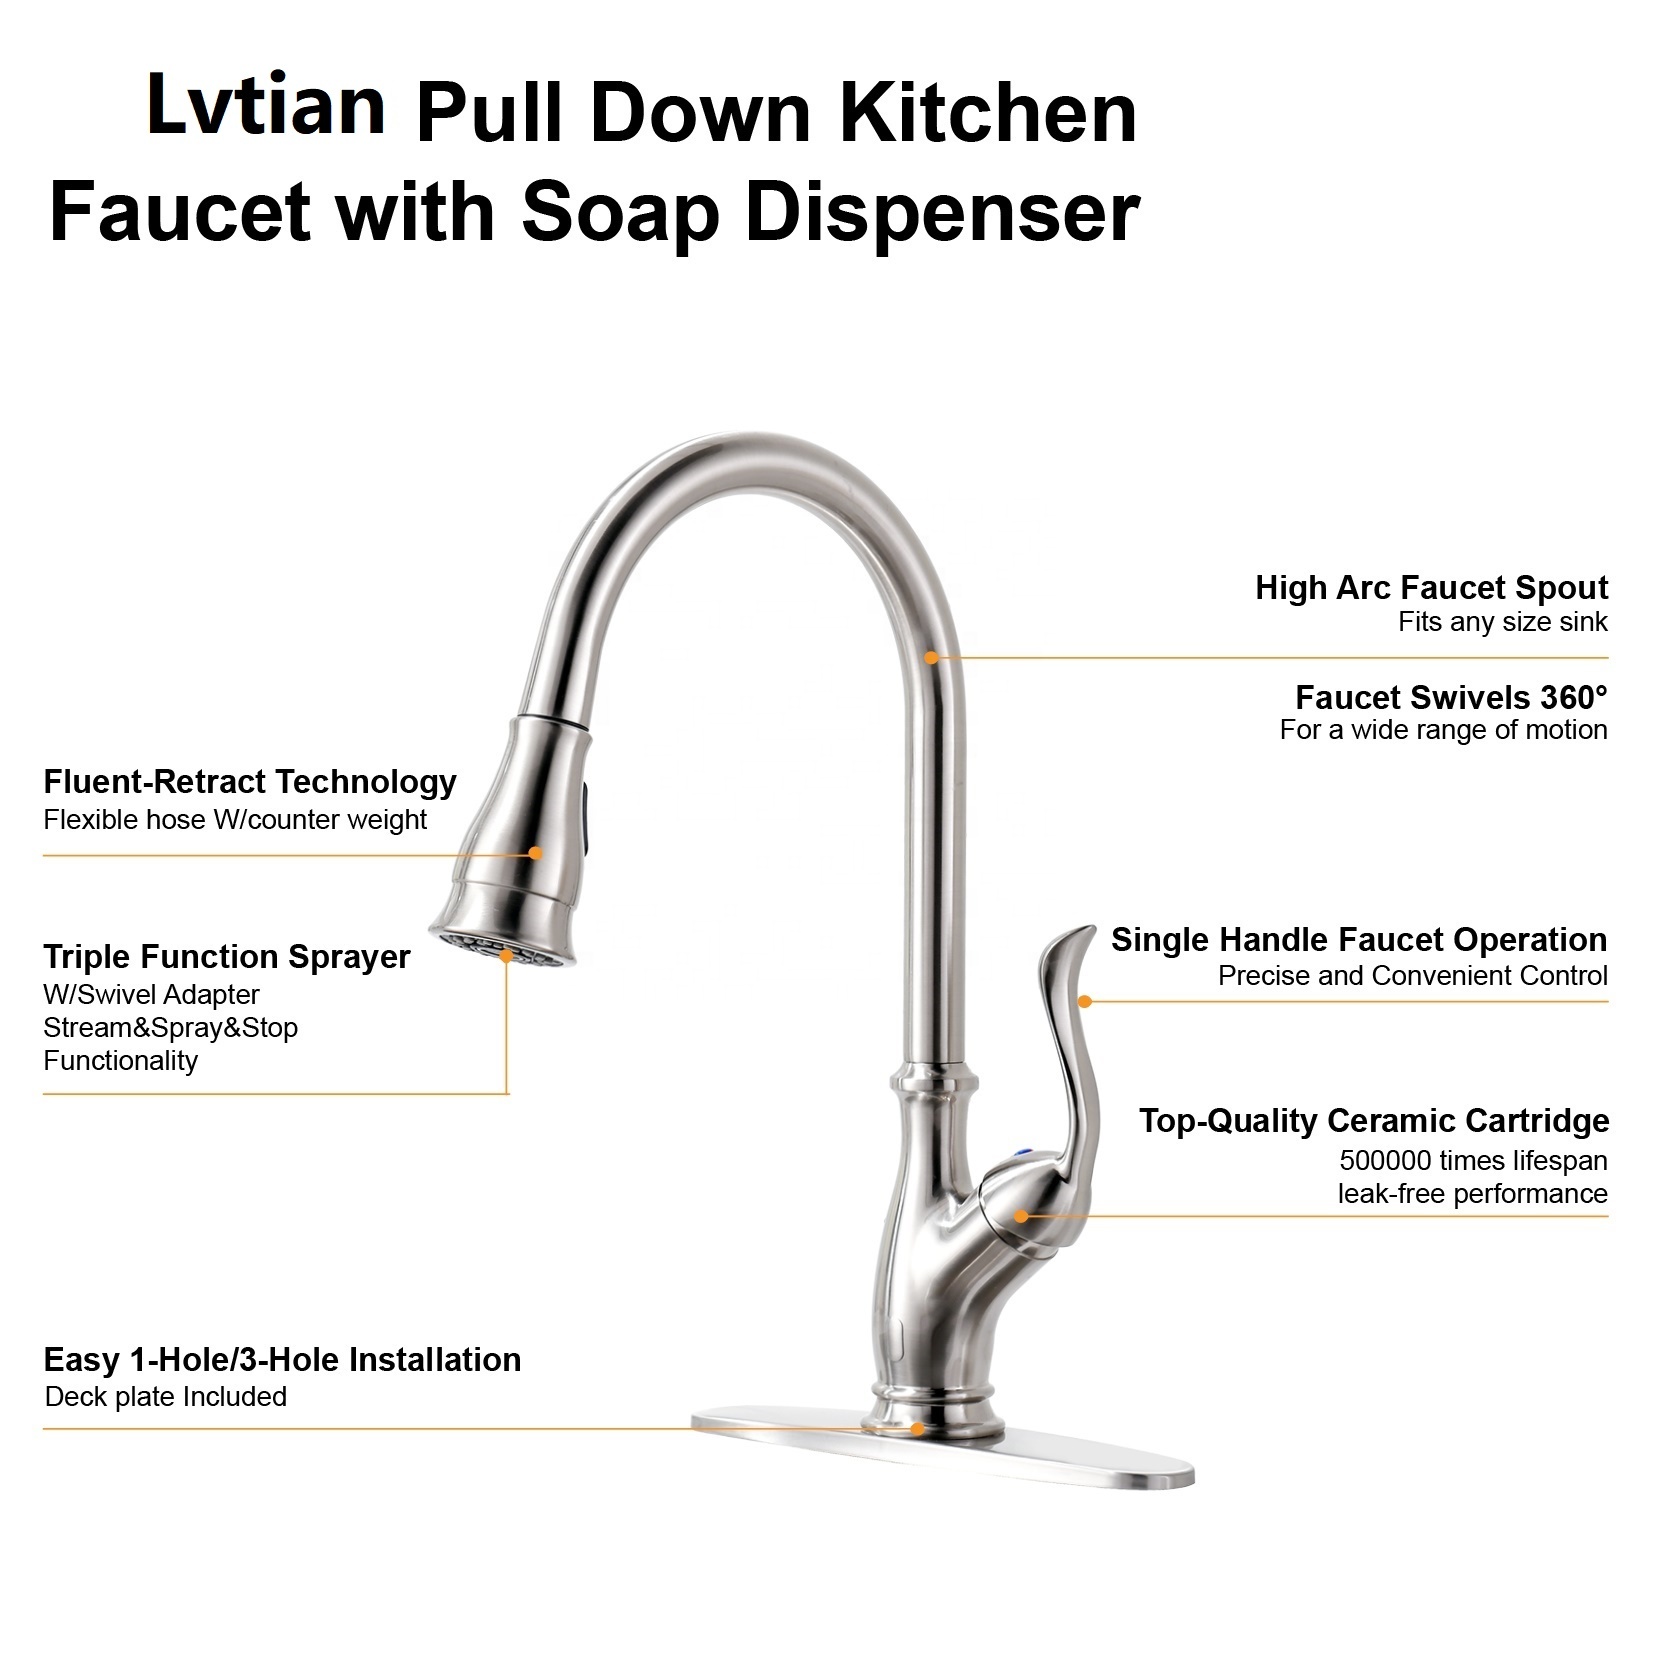 Lvtian Faucet Stainless Steel Kitchen Faucet With Pull Down Flexible Hose For Kitchen